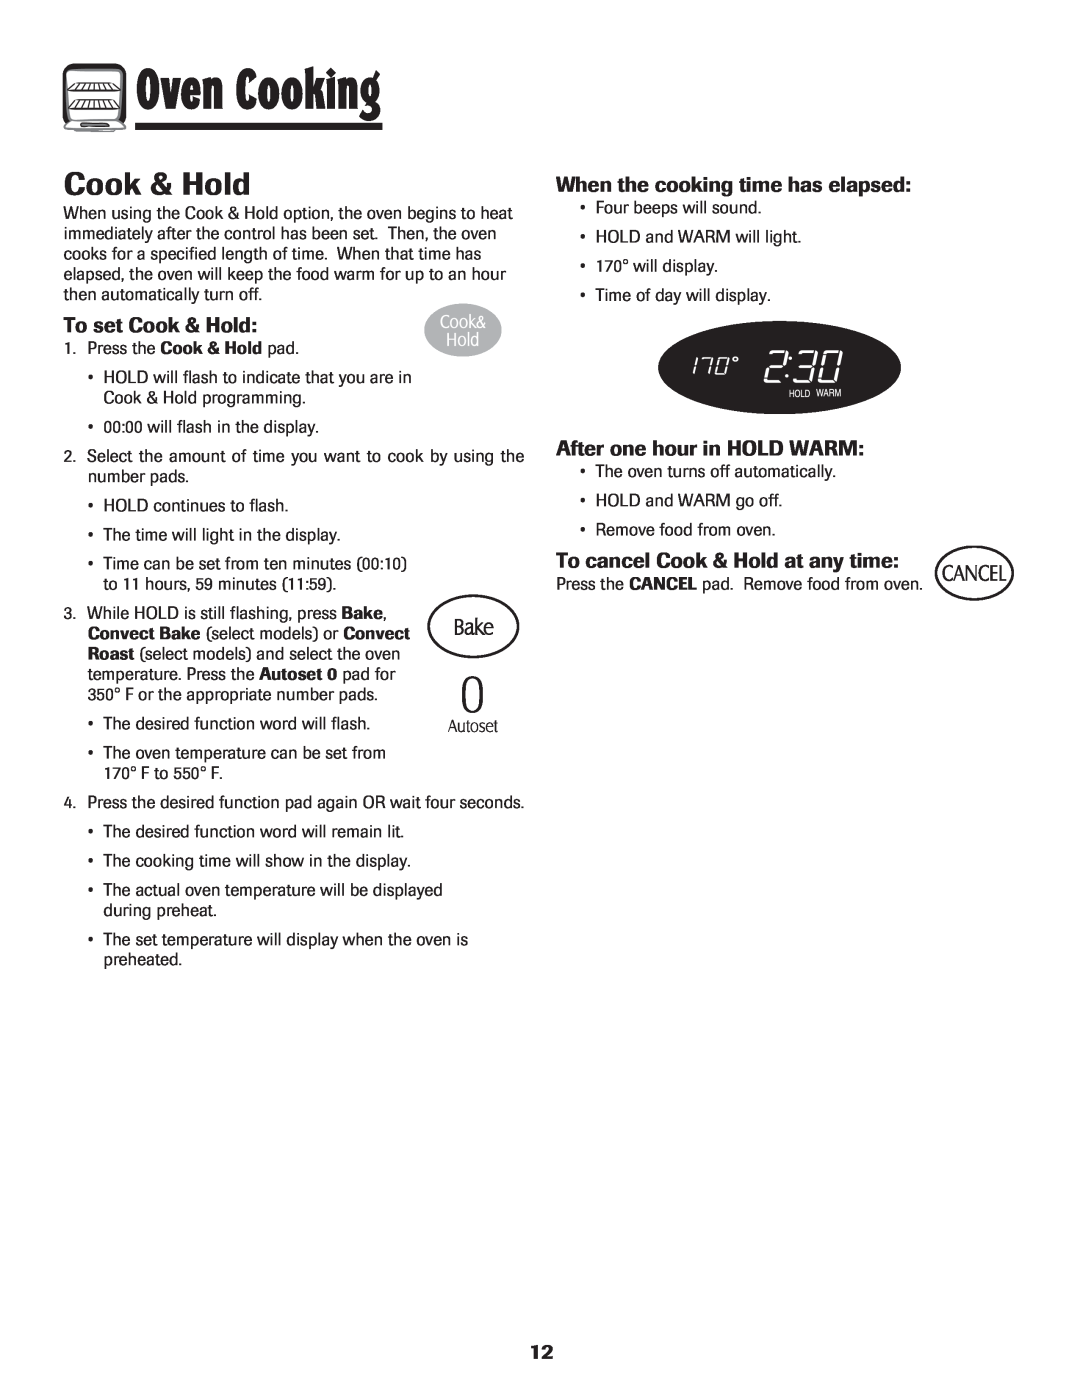 Magic Chef MEP5775BAF To set Cook & Hold, When the cooking time has elapsed, After one hour in HOLD WARM, Oven Cooking 